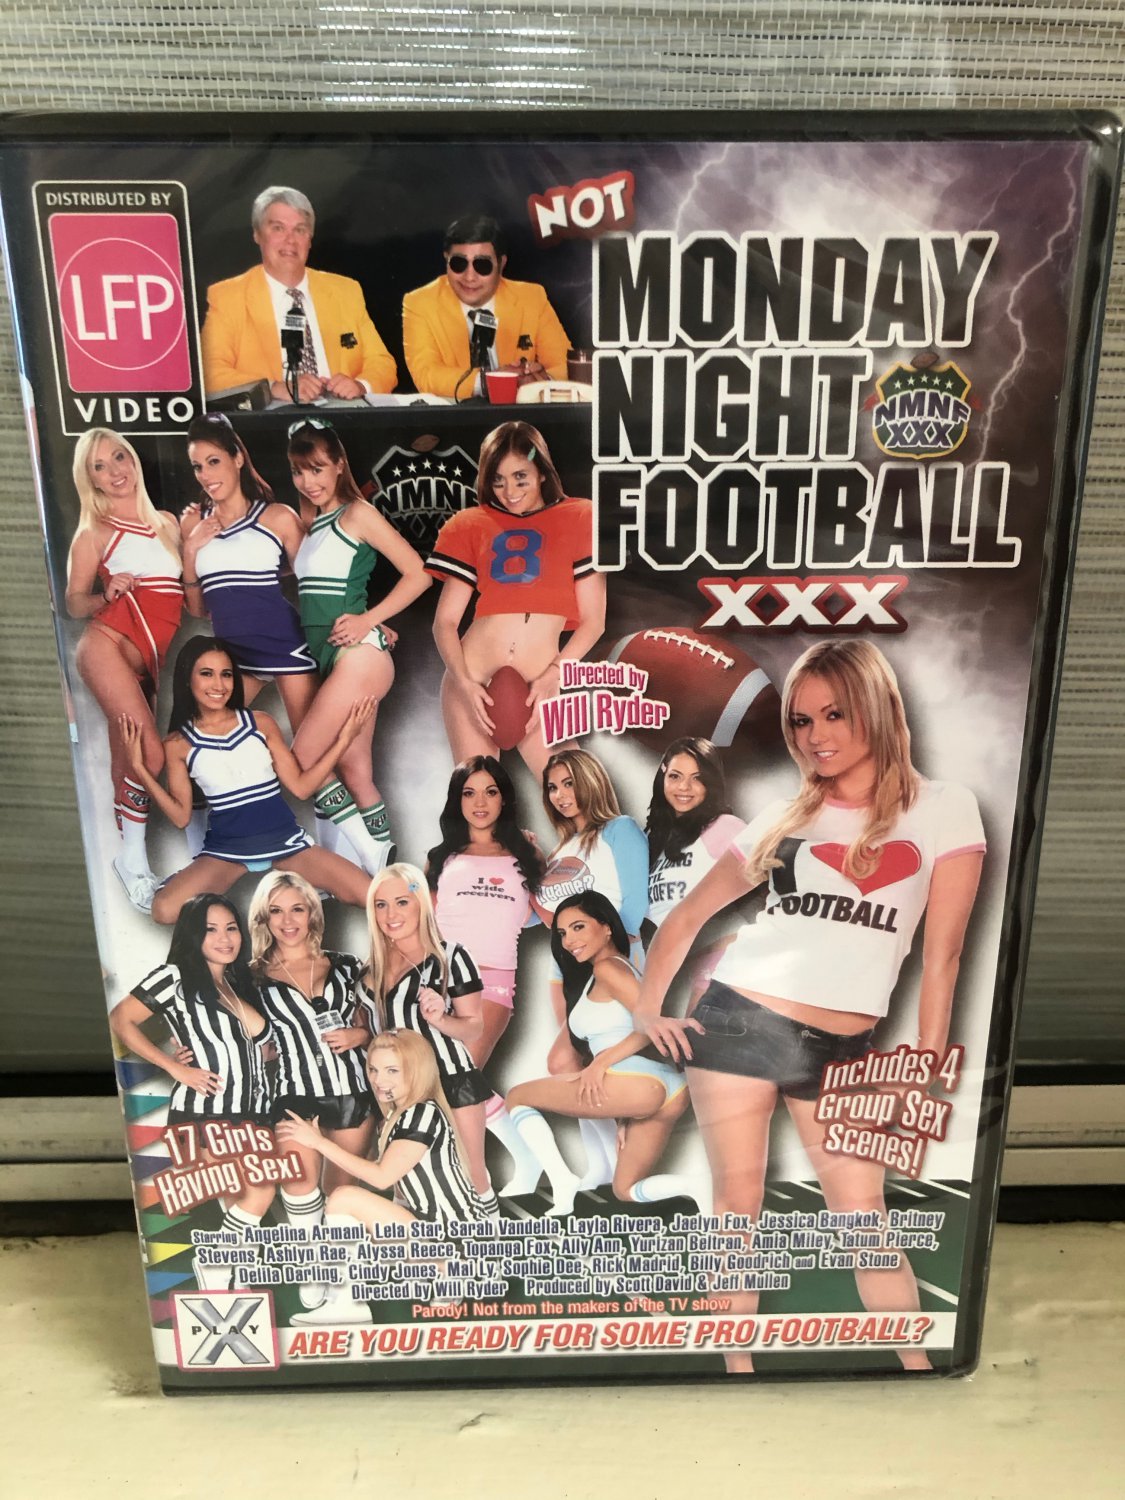 MONDAY NIGHT FOOTBALL XXXADULT DVD  NEW NEVER OPENED SHRINK WRAPPED